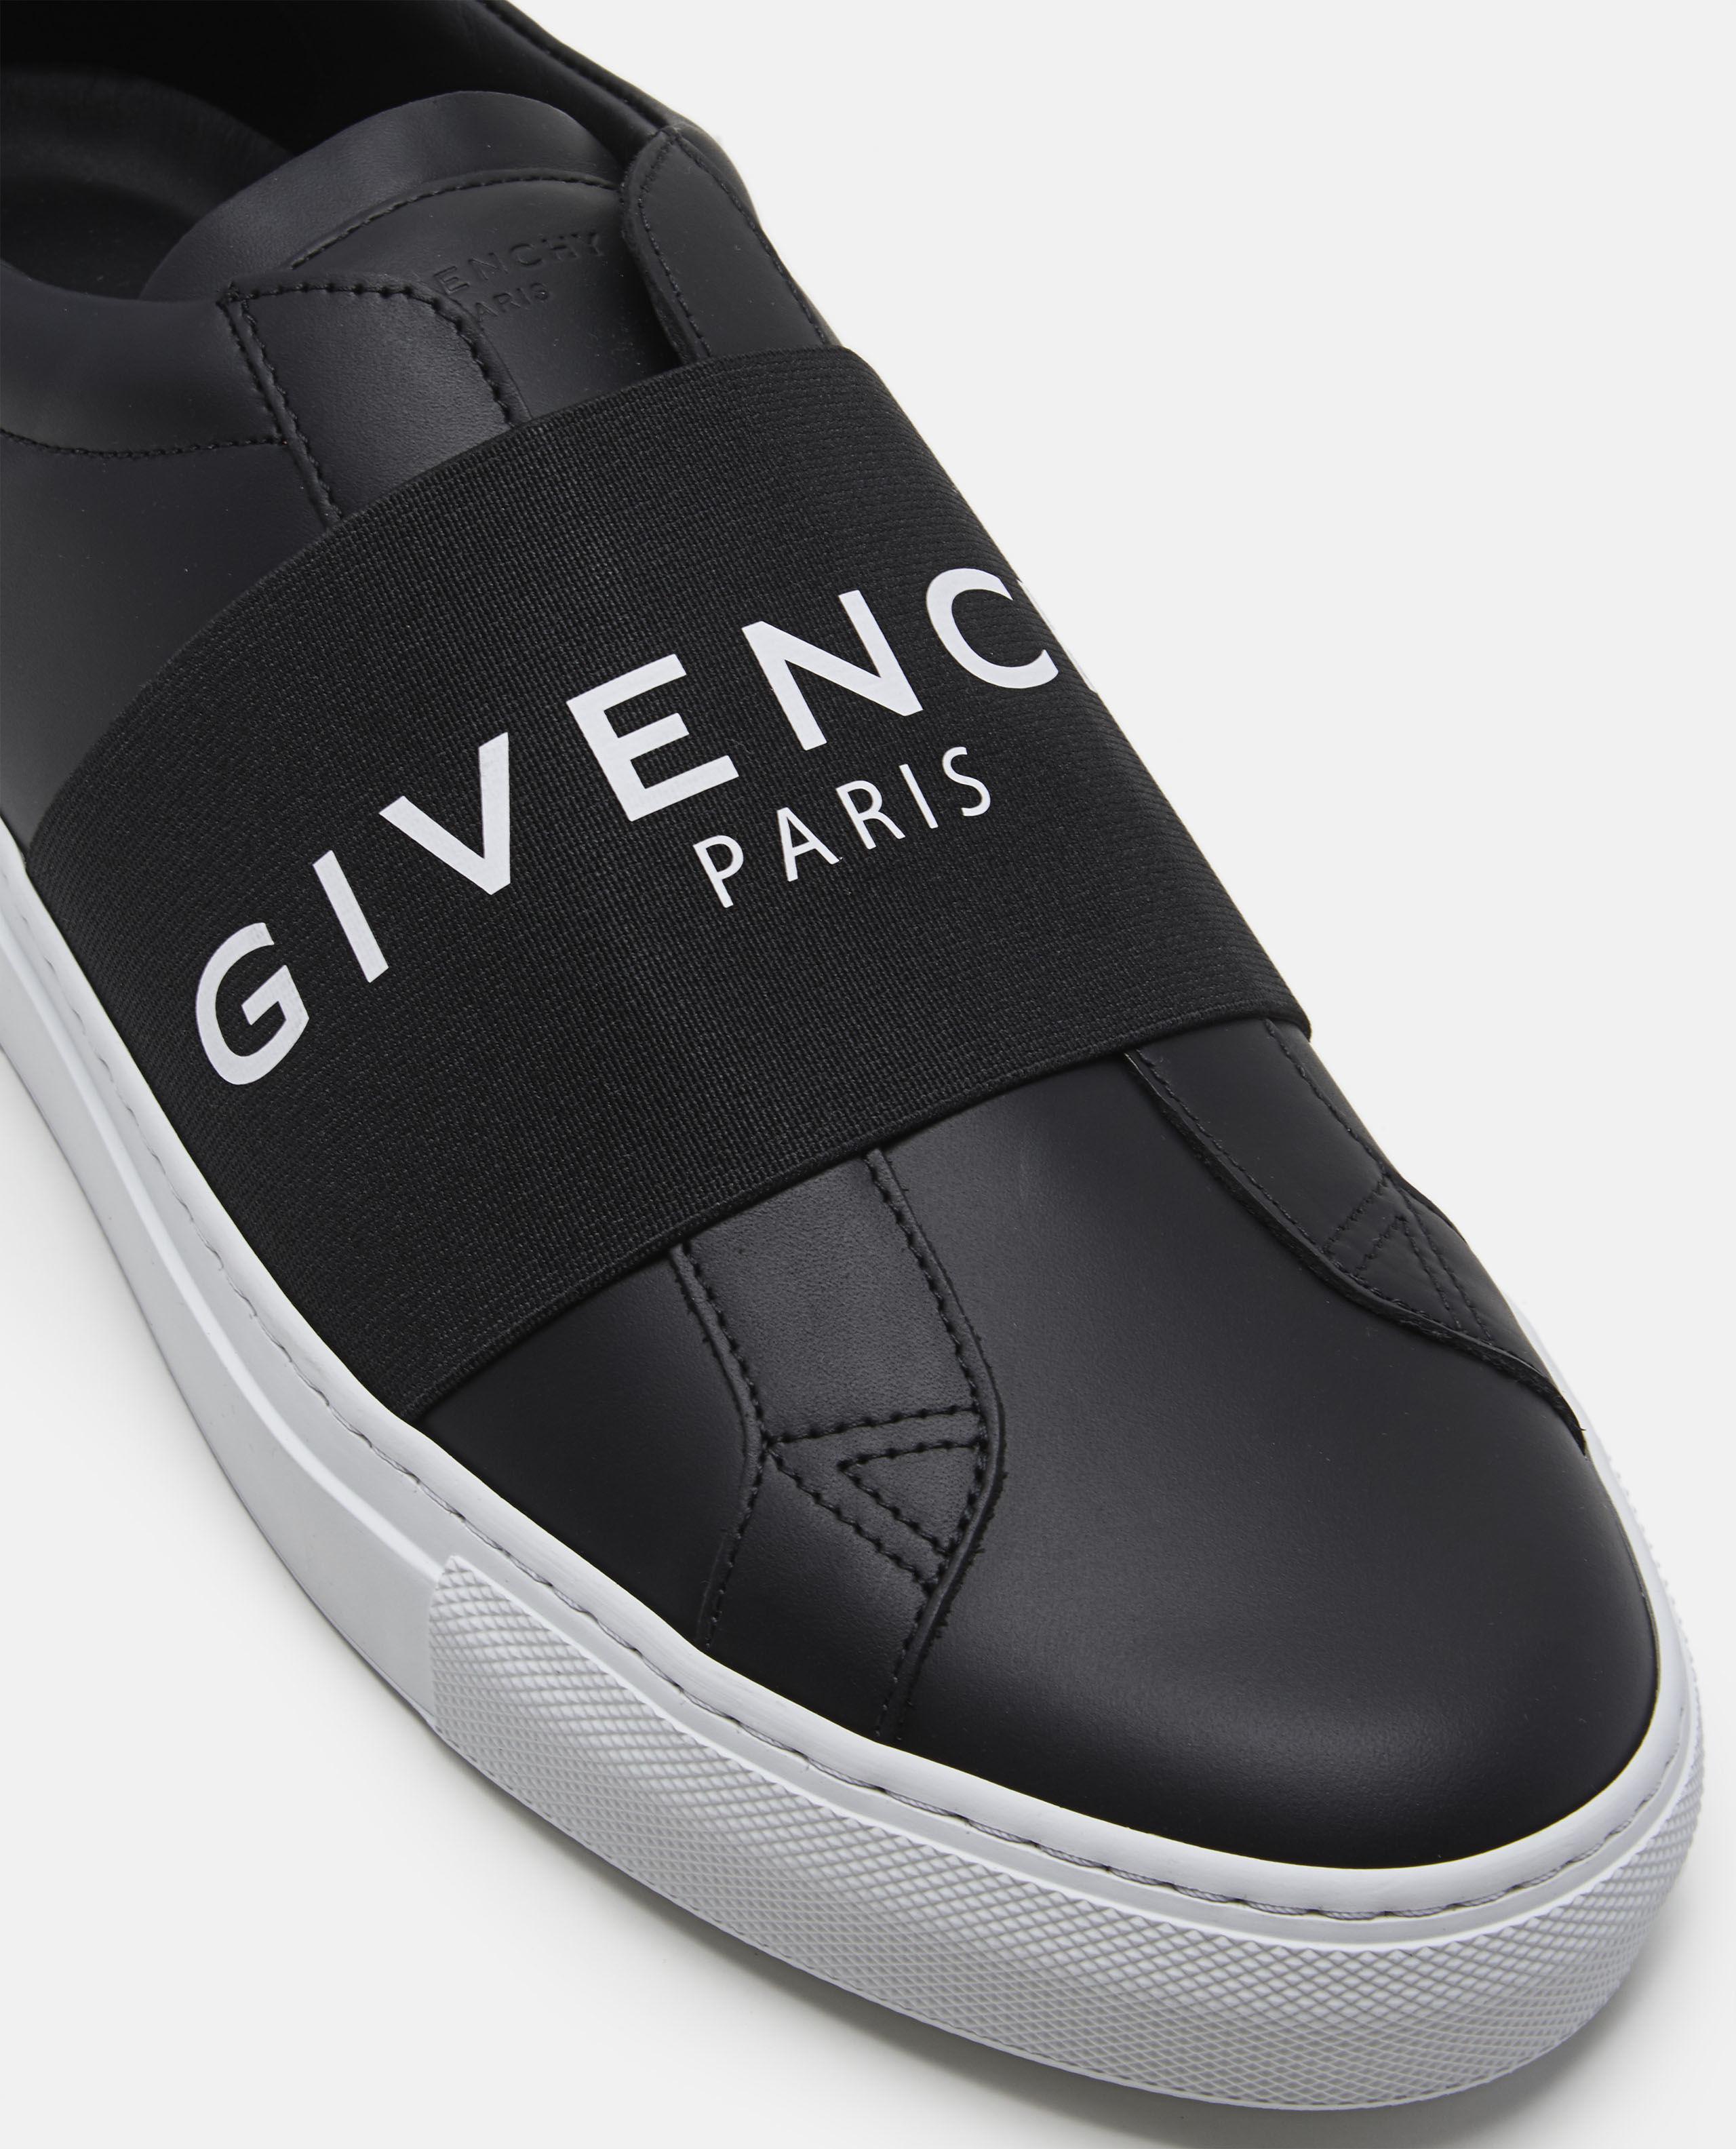 Givenchy Leather Paris Elastic Band Sneaker in Black for Men - Lyst